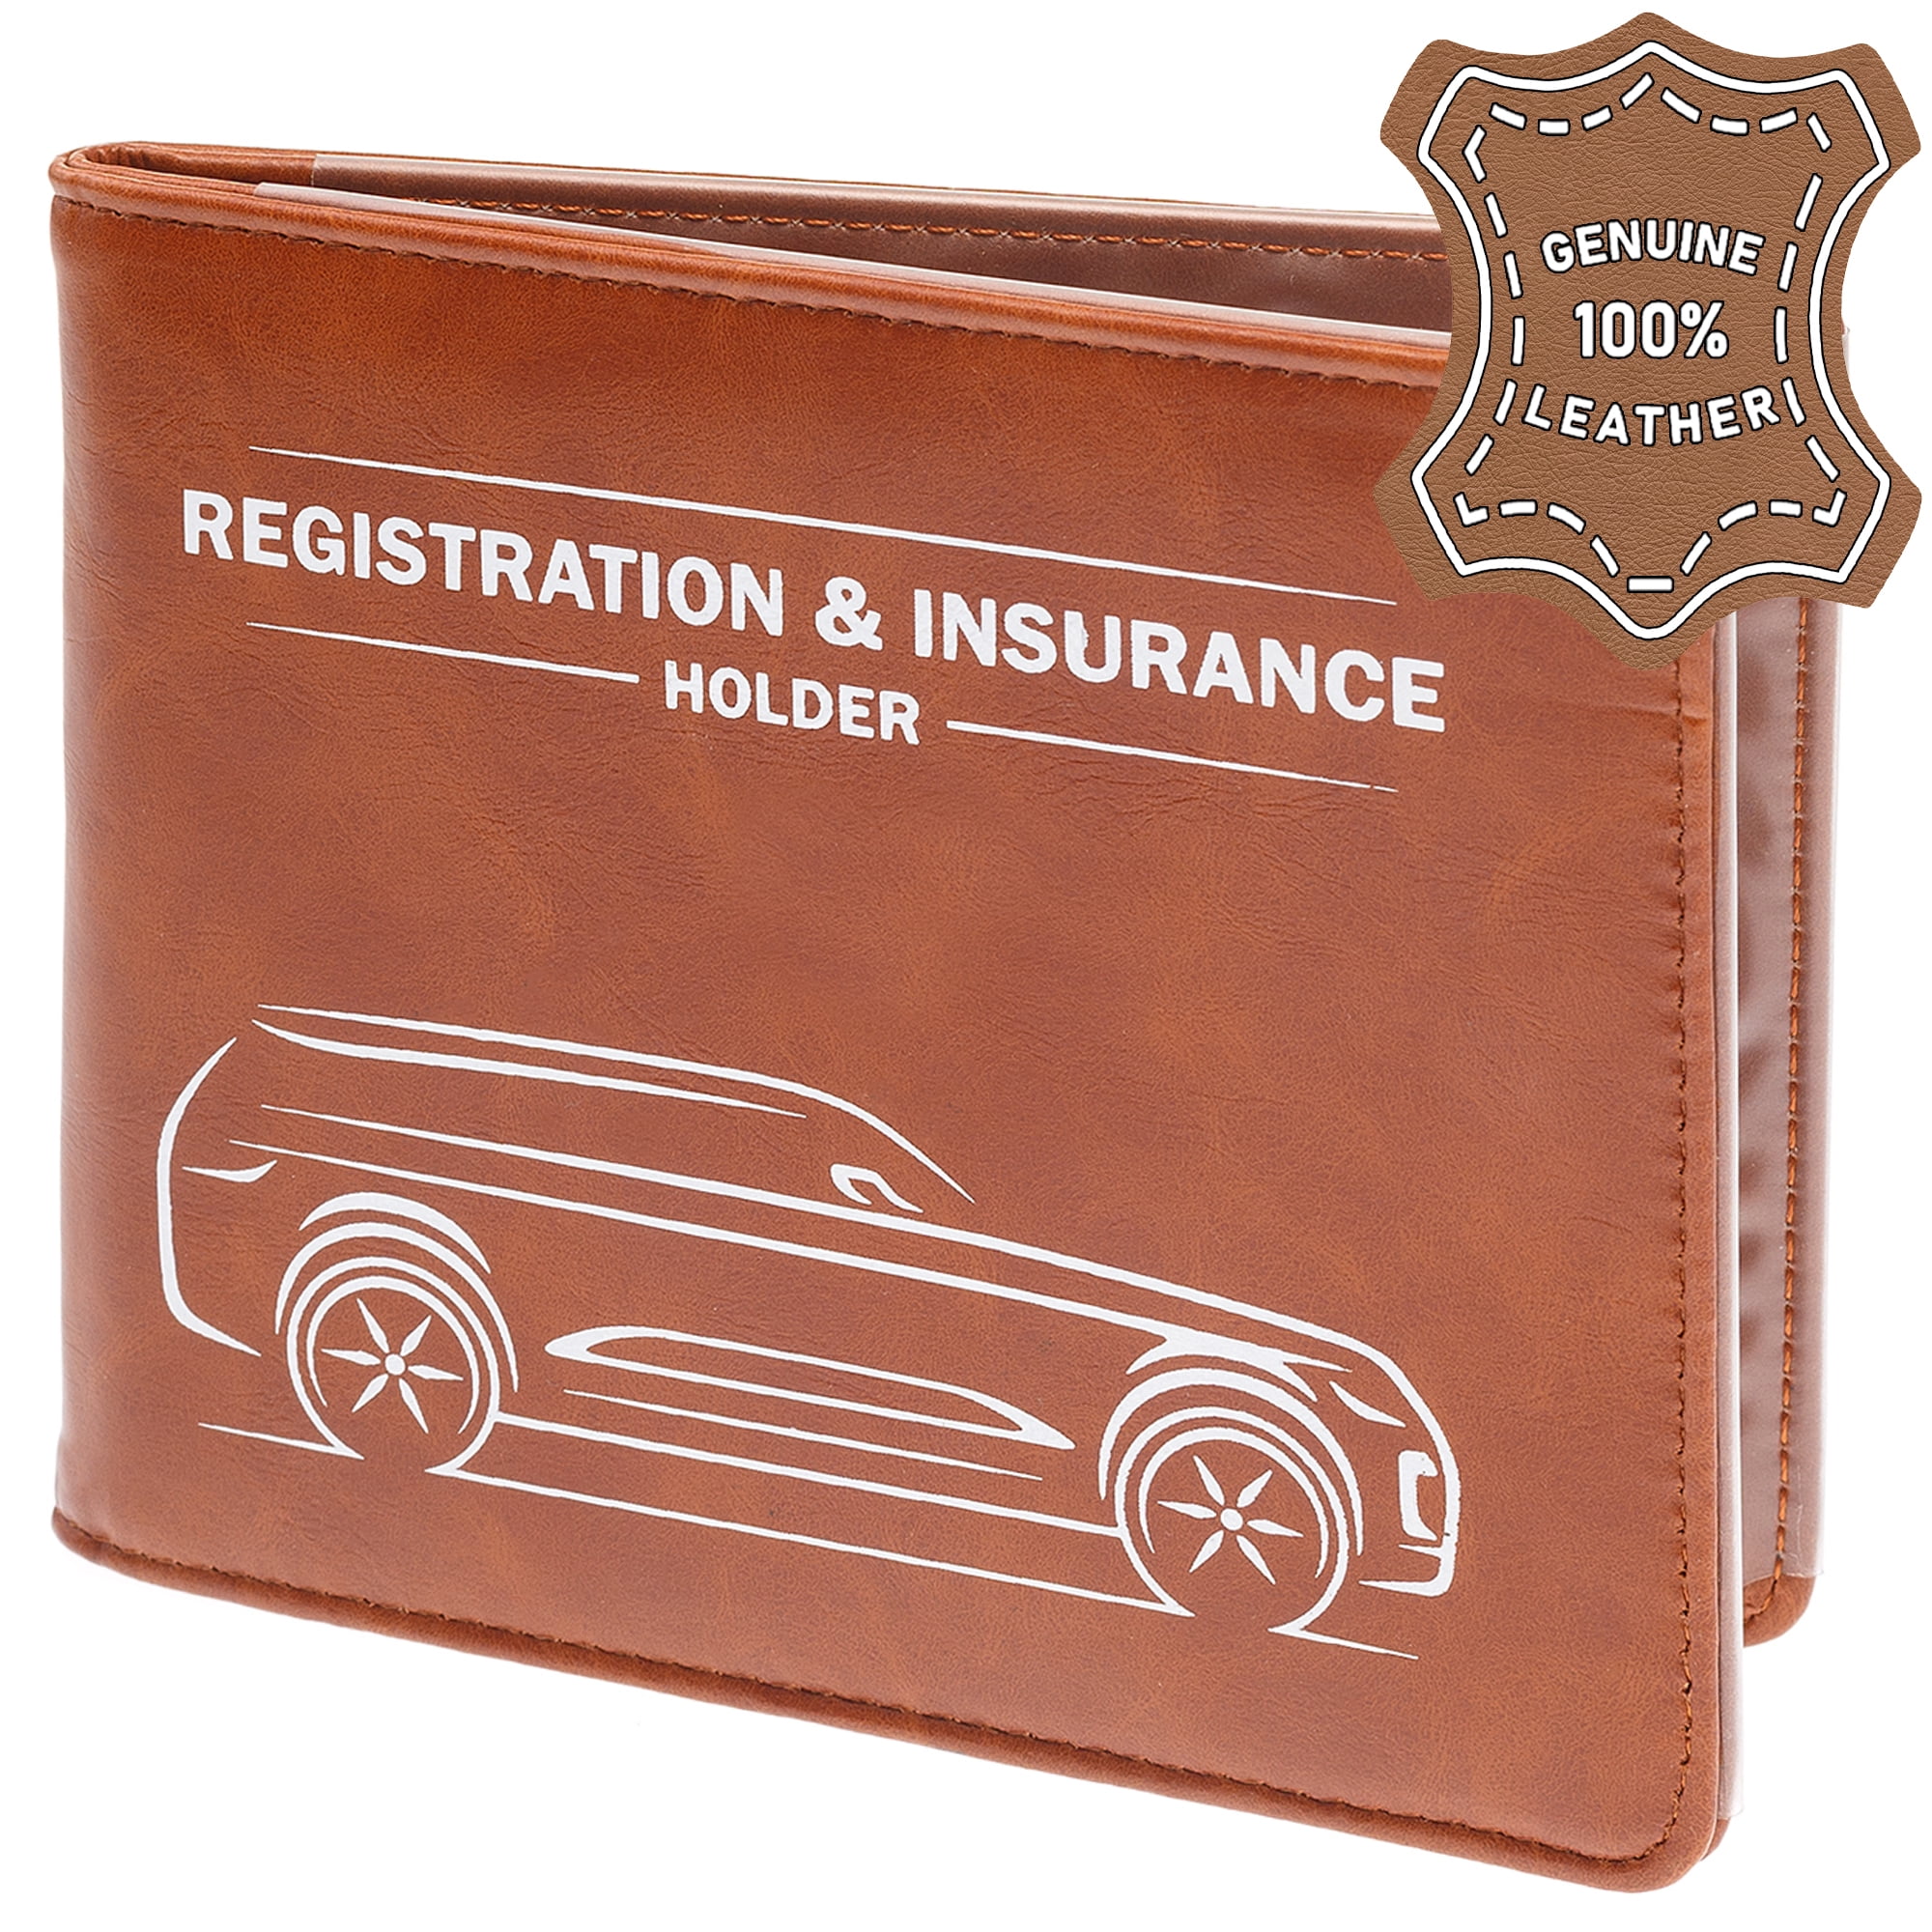 Men & Women Perfect for Driver License BVYA Corner Guard Car Registration and Insurance Card Holder with Magnetic Closure，Premium Leather Vehicle Glove Box Organizer Paperwork Insurance Card 